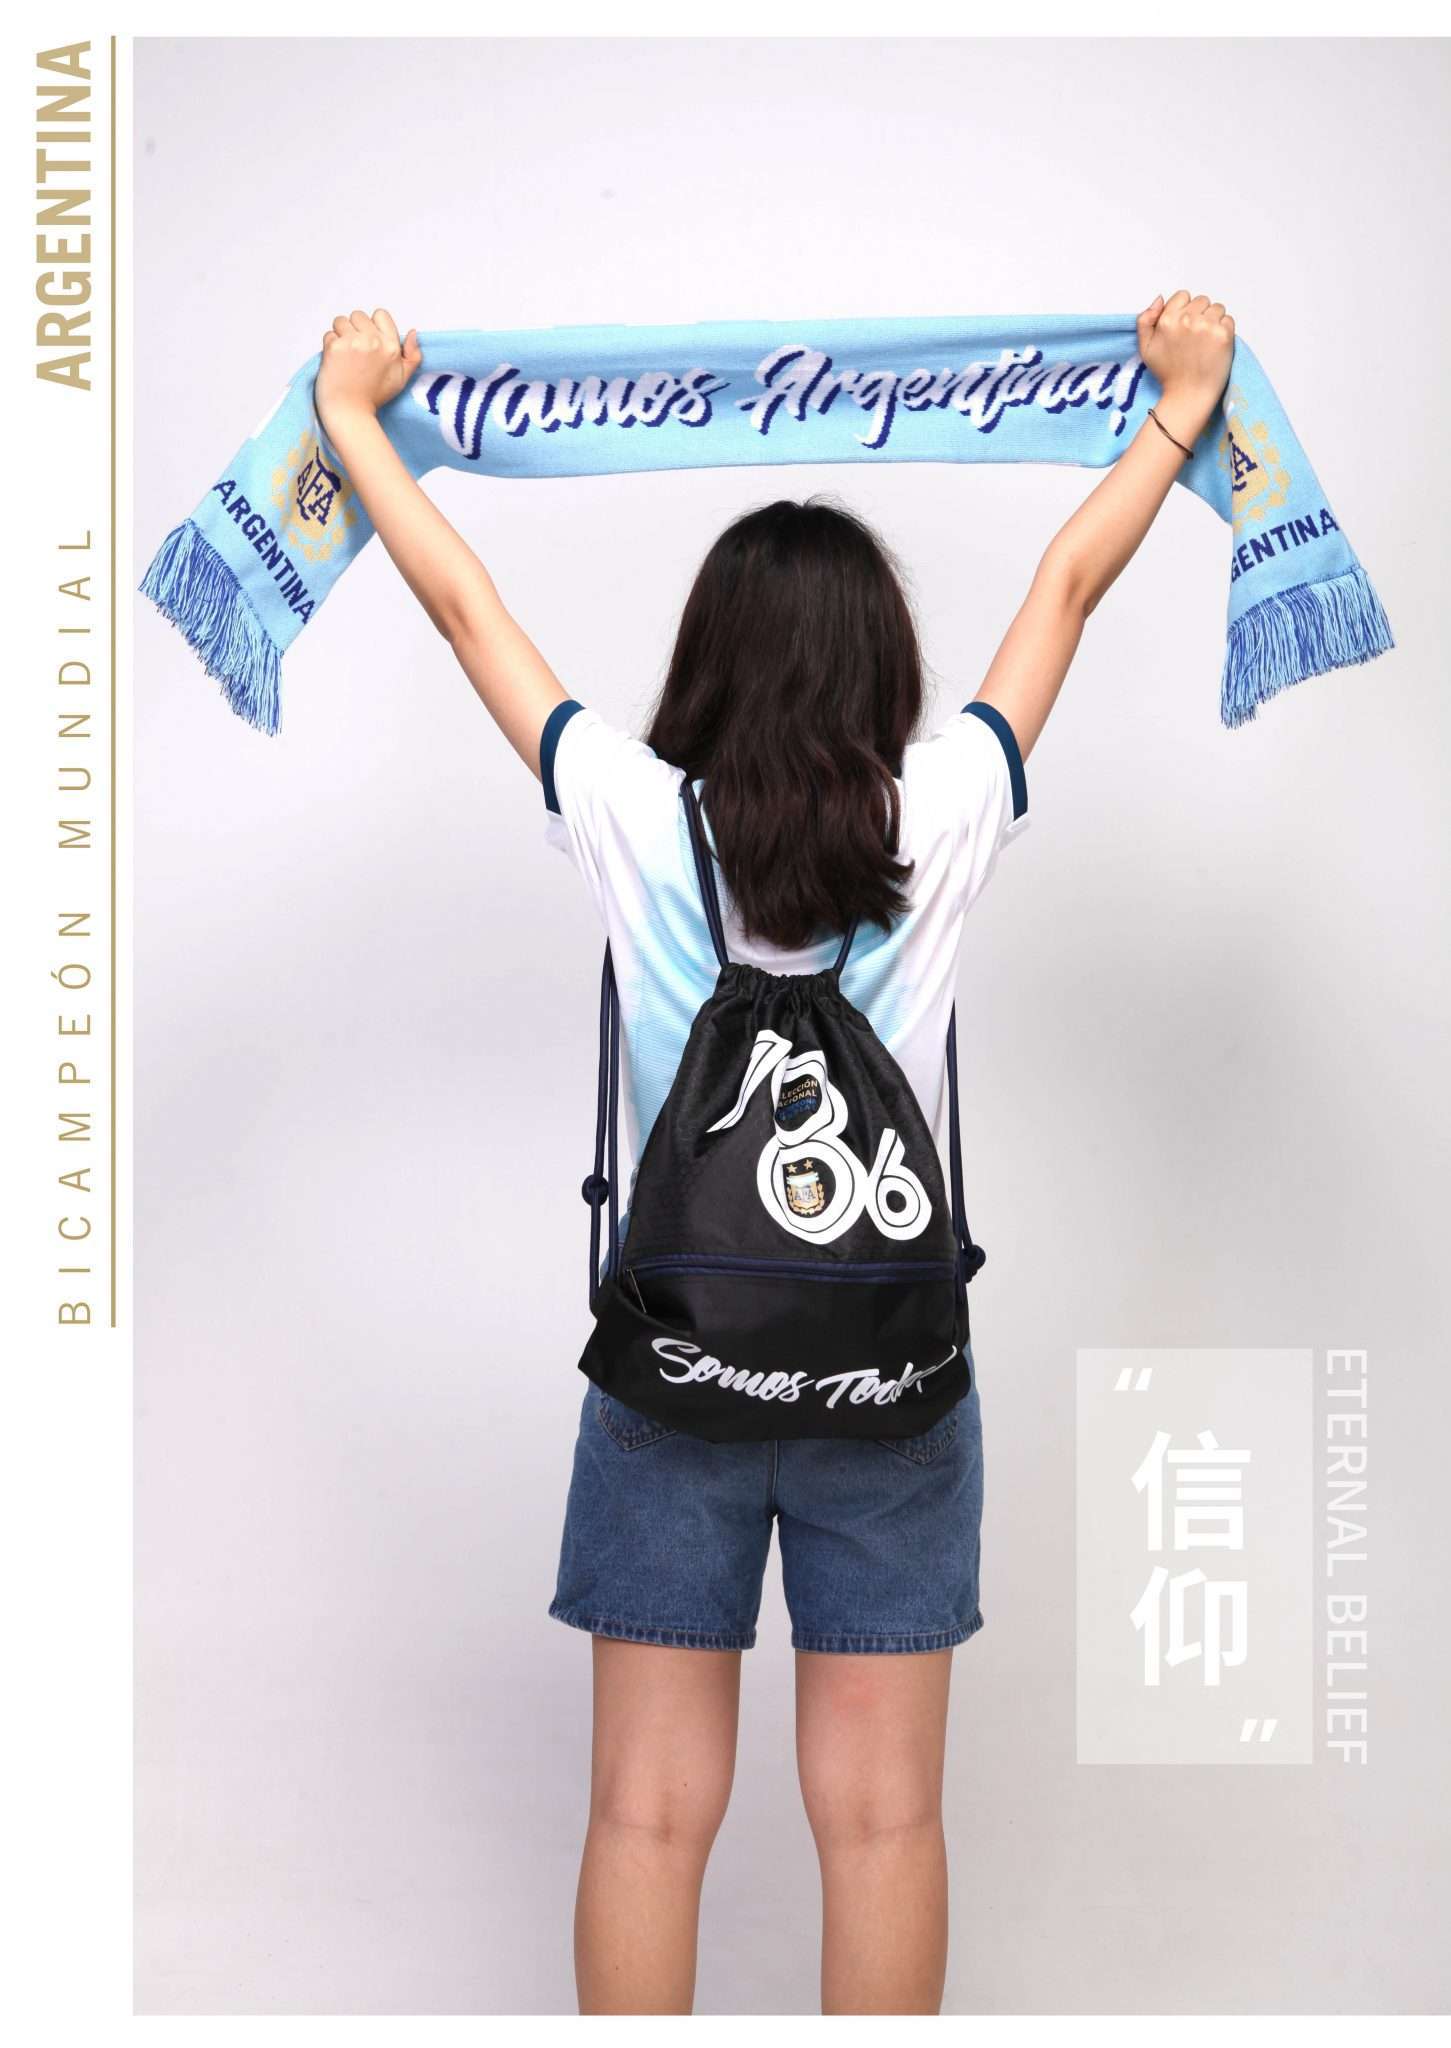 Argentina National Team Official Double-sided Cheering Scarf